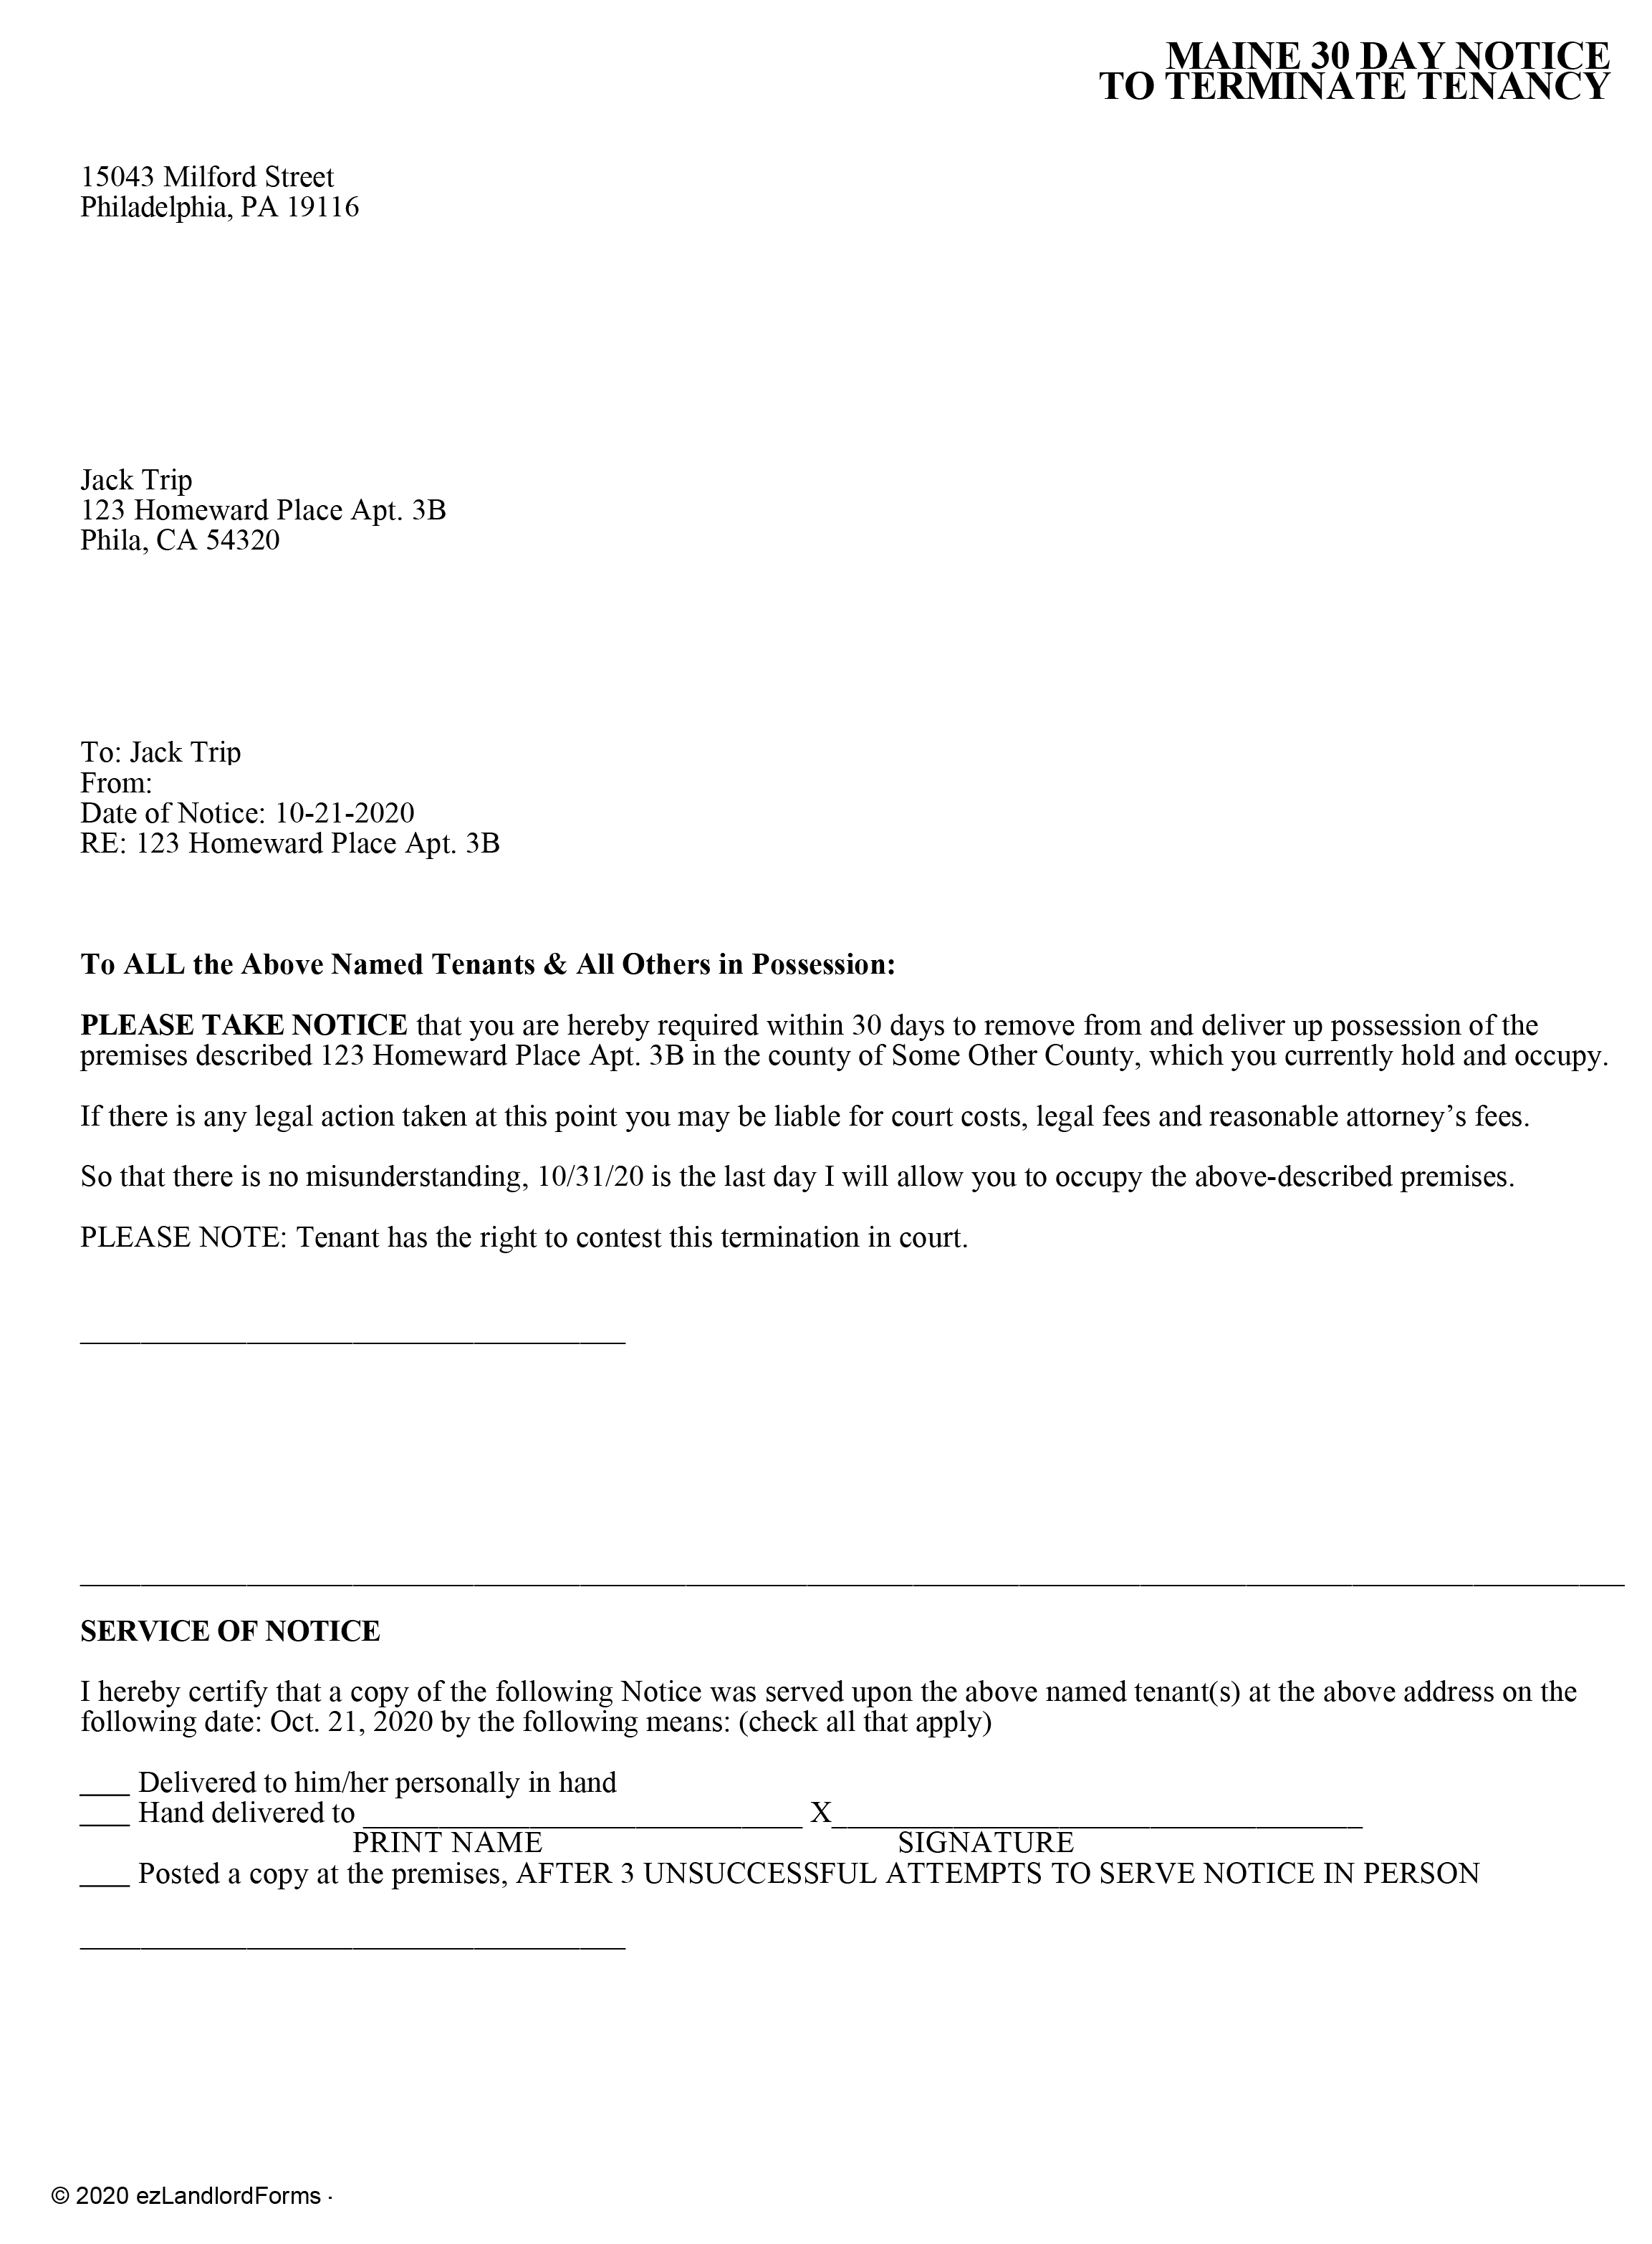 30 Day Notice From Tenant To Landlord Letter from www.ezlandlordforms.com